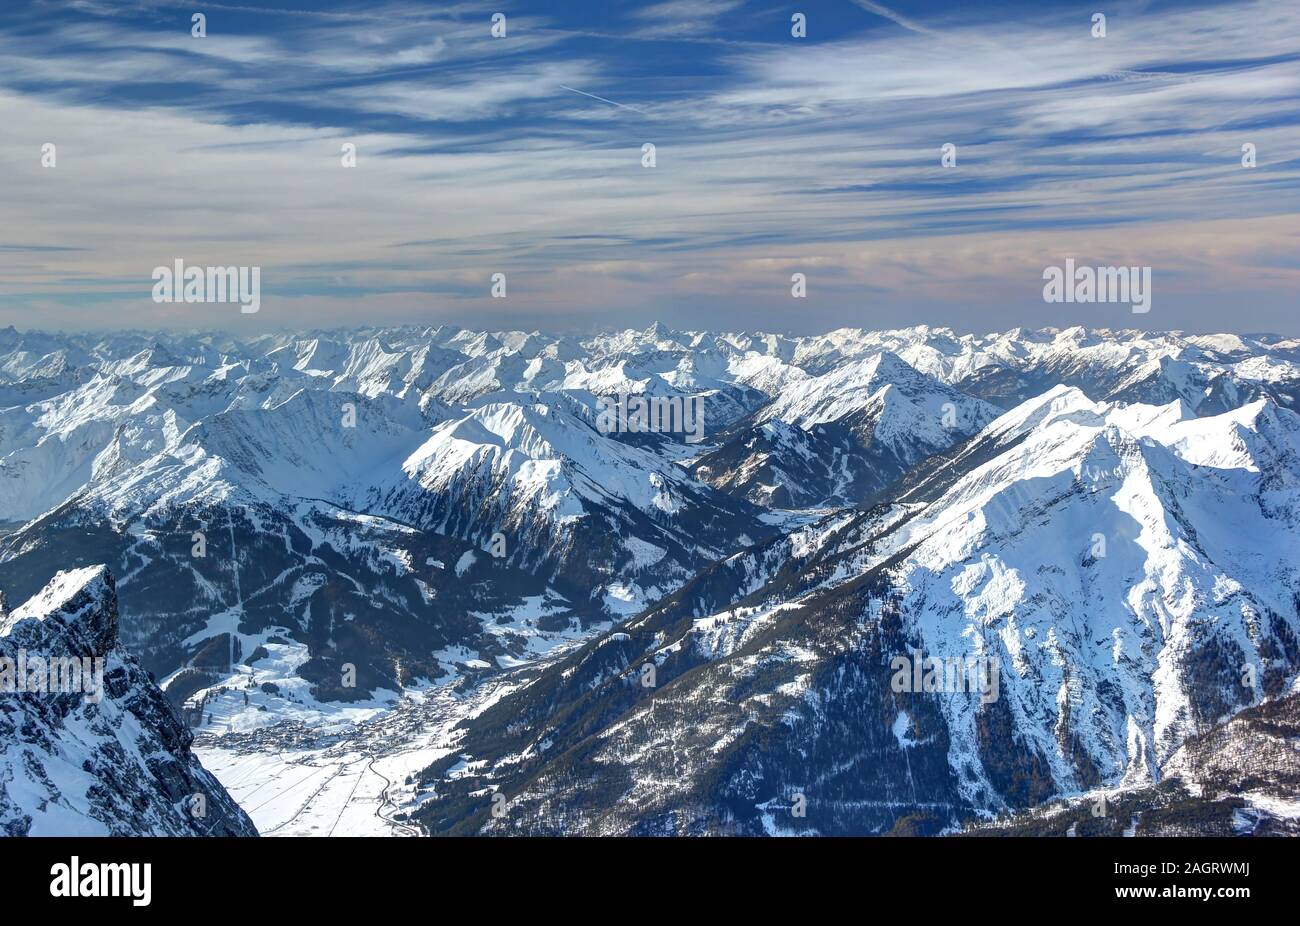 Zugspitze mountain - Glacier skiing. The Zugspitze, at 2,962 meters above sea level, is the highest mountain in Germany. Stock Photo